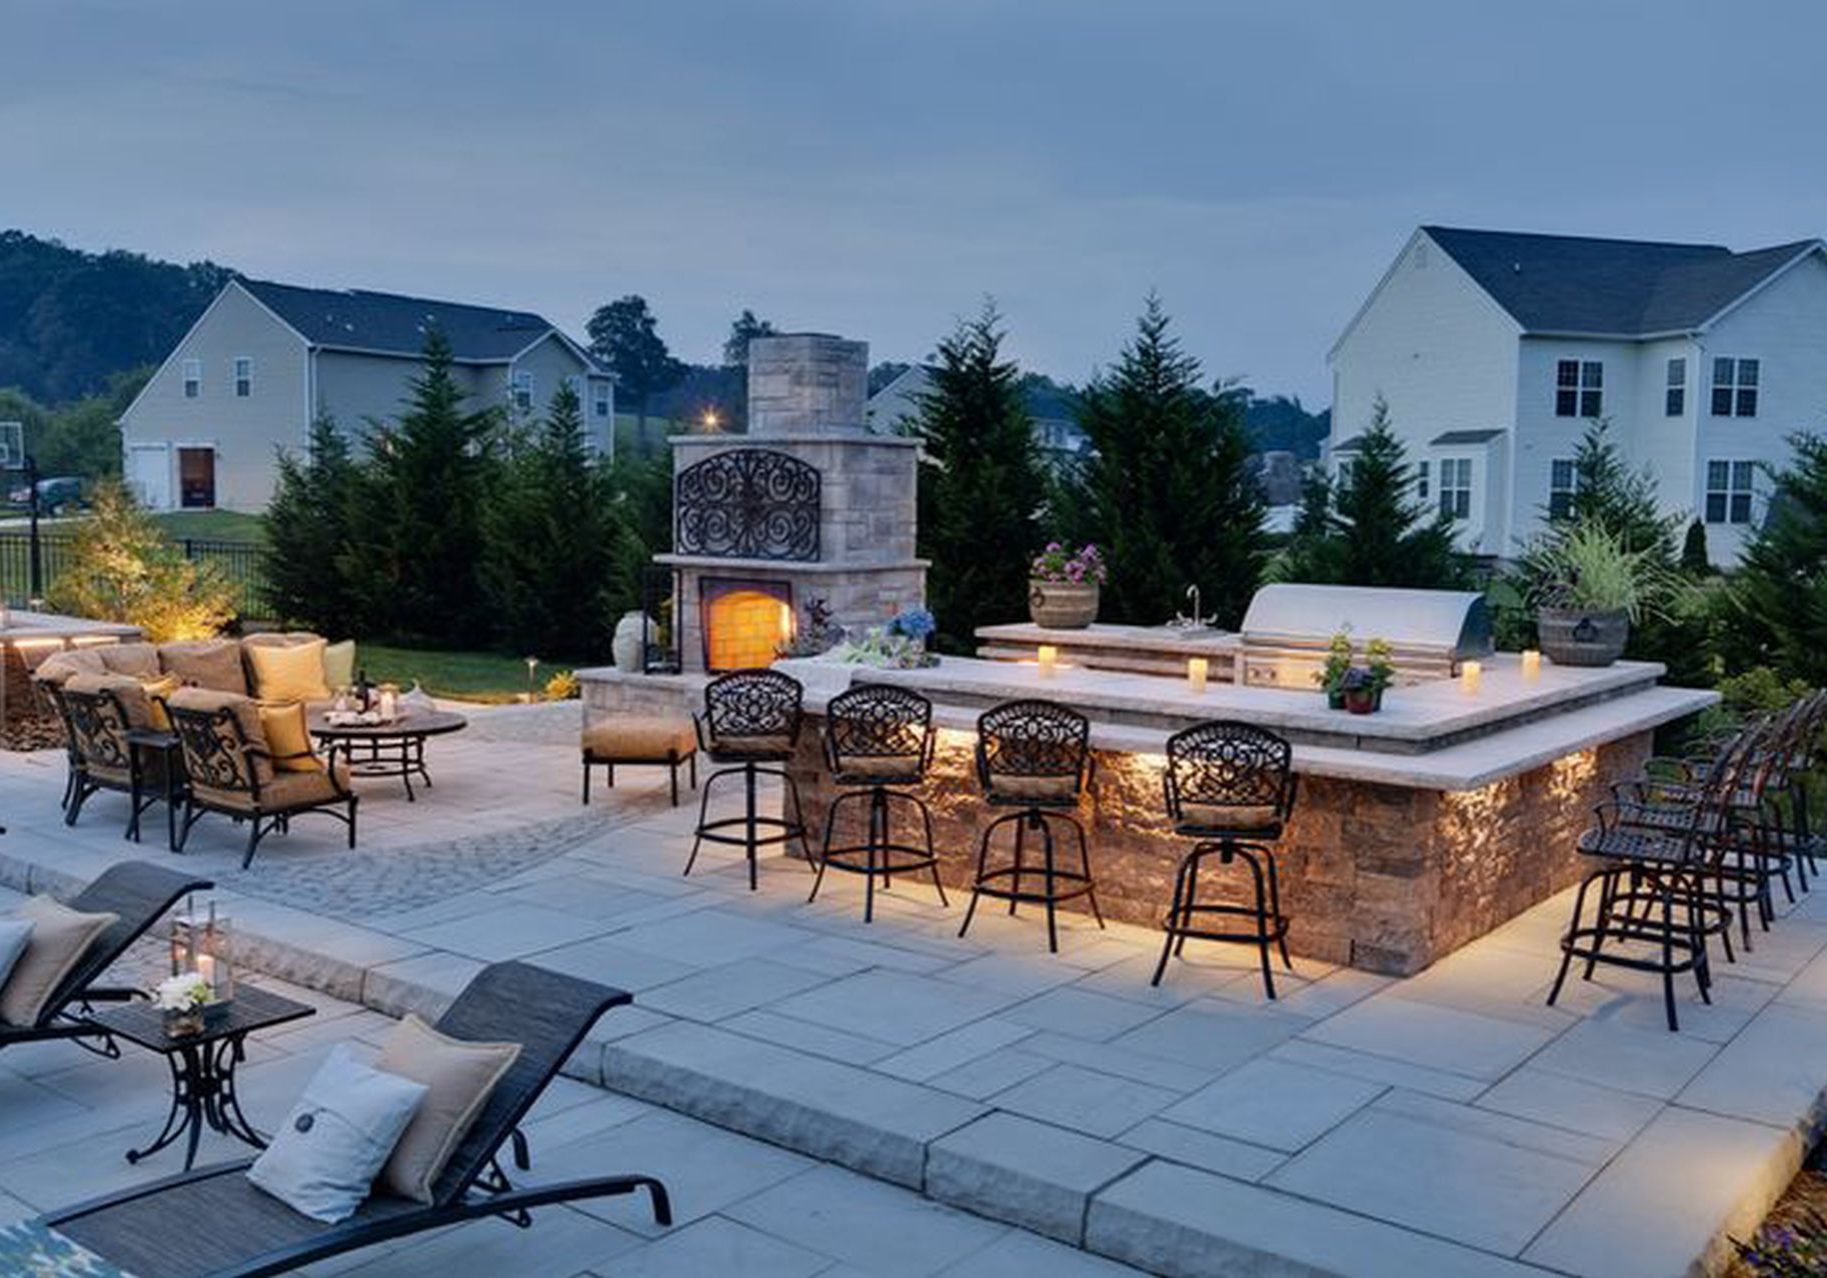 An outdoor kitchen with a fireplace and seating area.